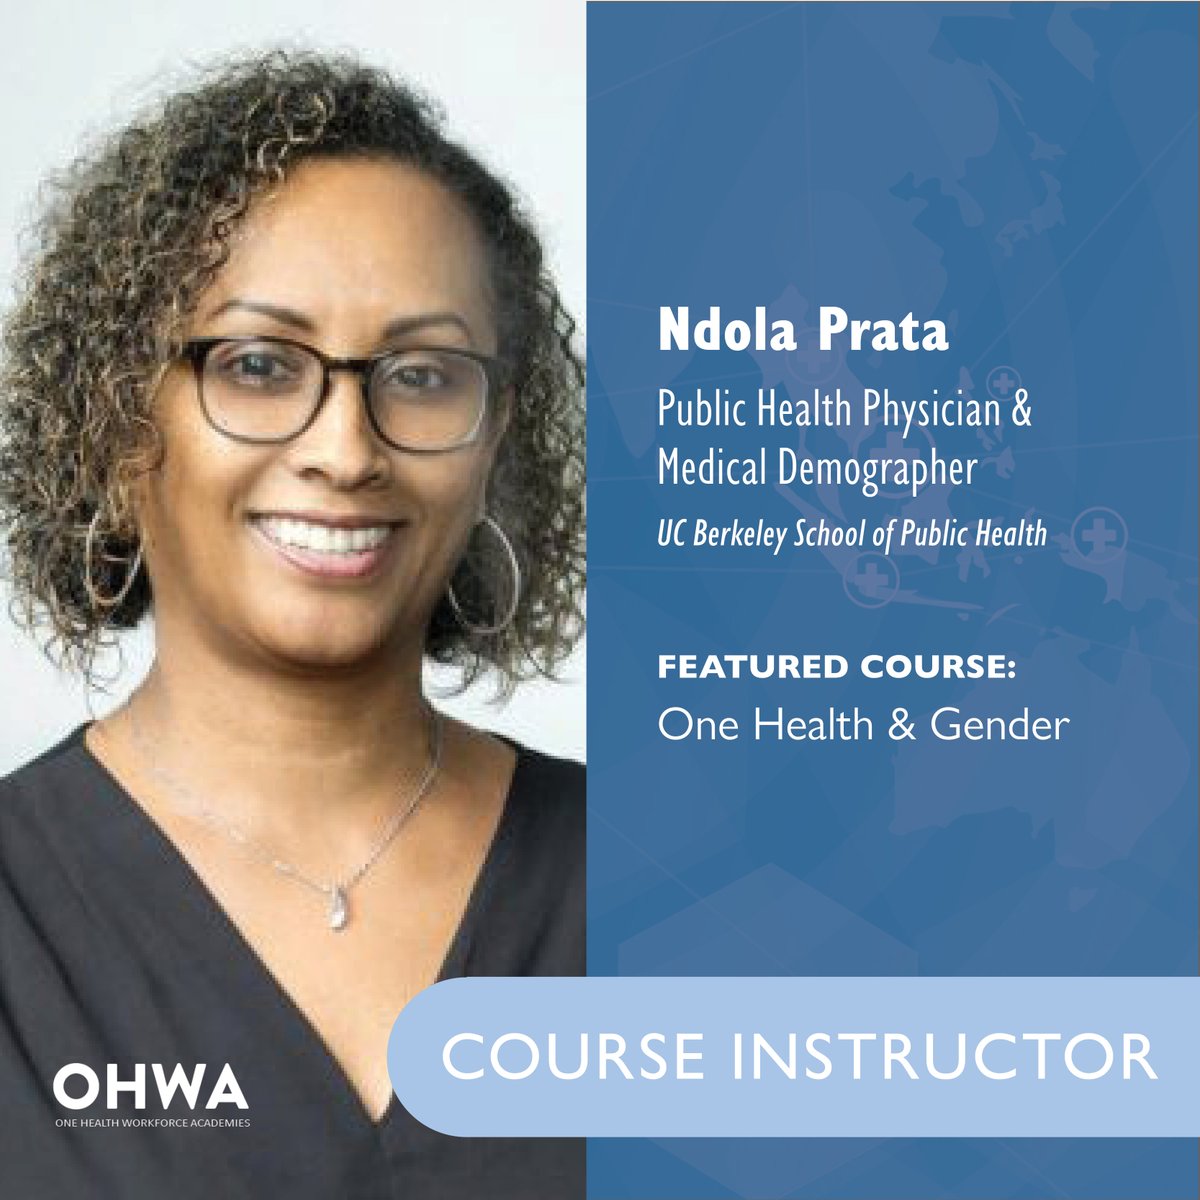 OHWA INSTRUCTOR SPOTLIGHT: Dr. Ndola Prata is a physician and medical demographer serving as Professor in Residence and the Fred H. Bixby Jr. Chair in Population and Family Planning at @UCBerkeleySPH. Learn more here: publichealth.berkeley.edu/people/ndola-p…